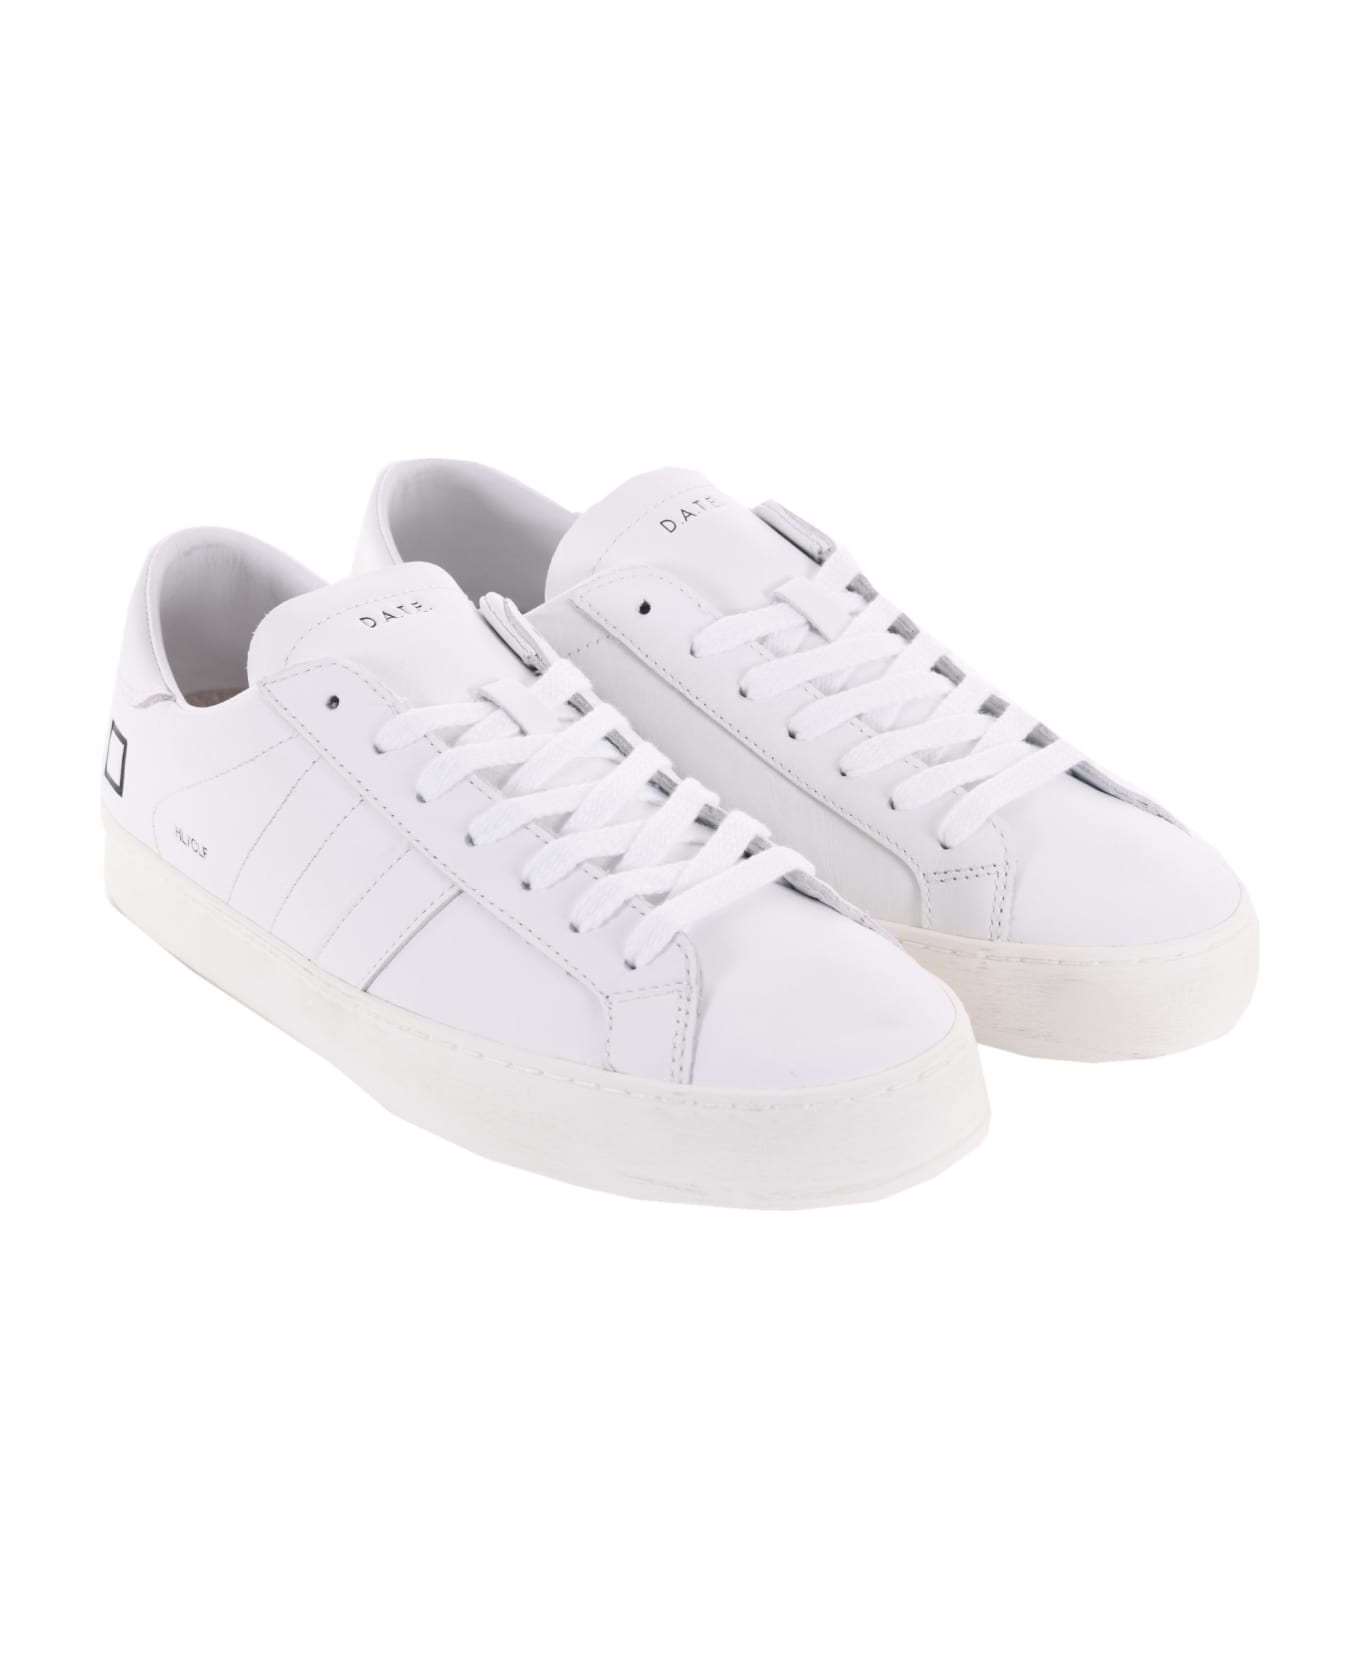 D.A.T.E. Men's Sneakers In Leather - Bianco スニーカー